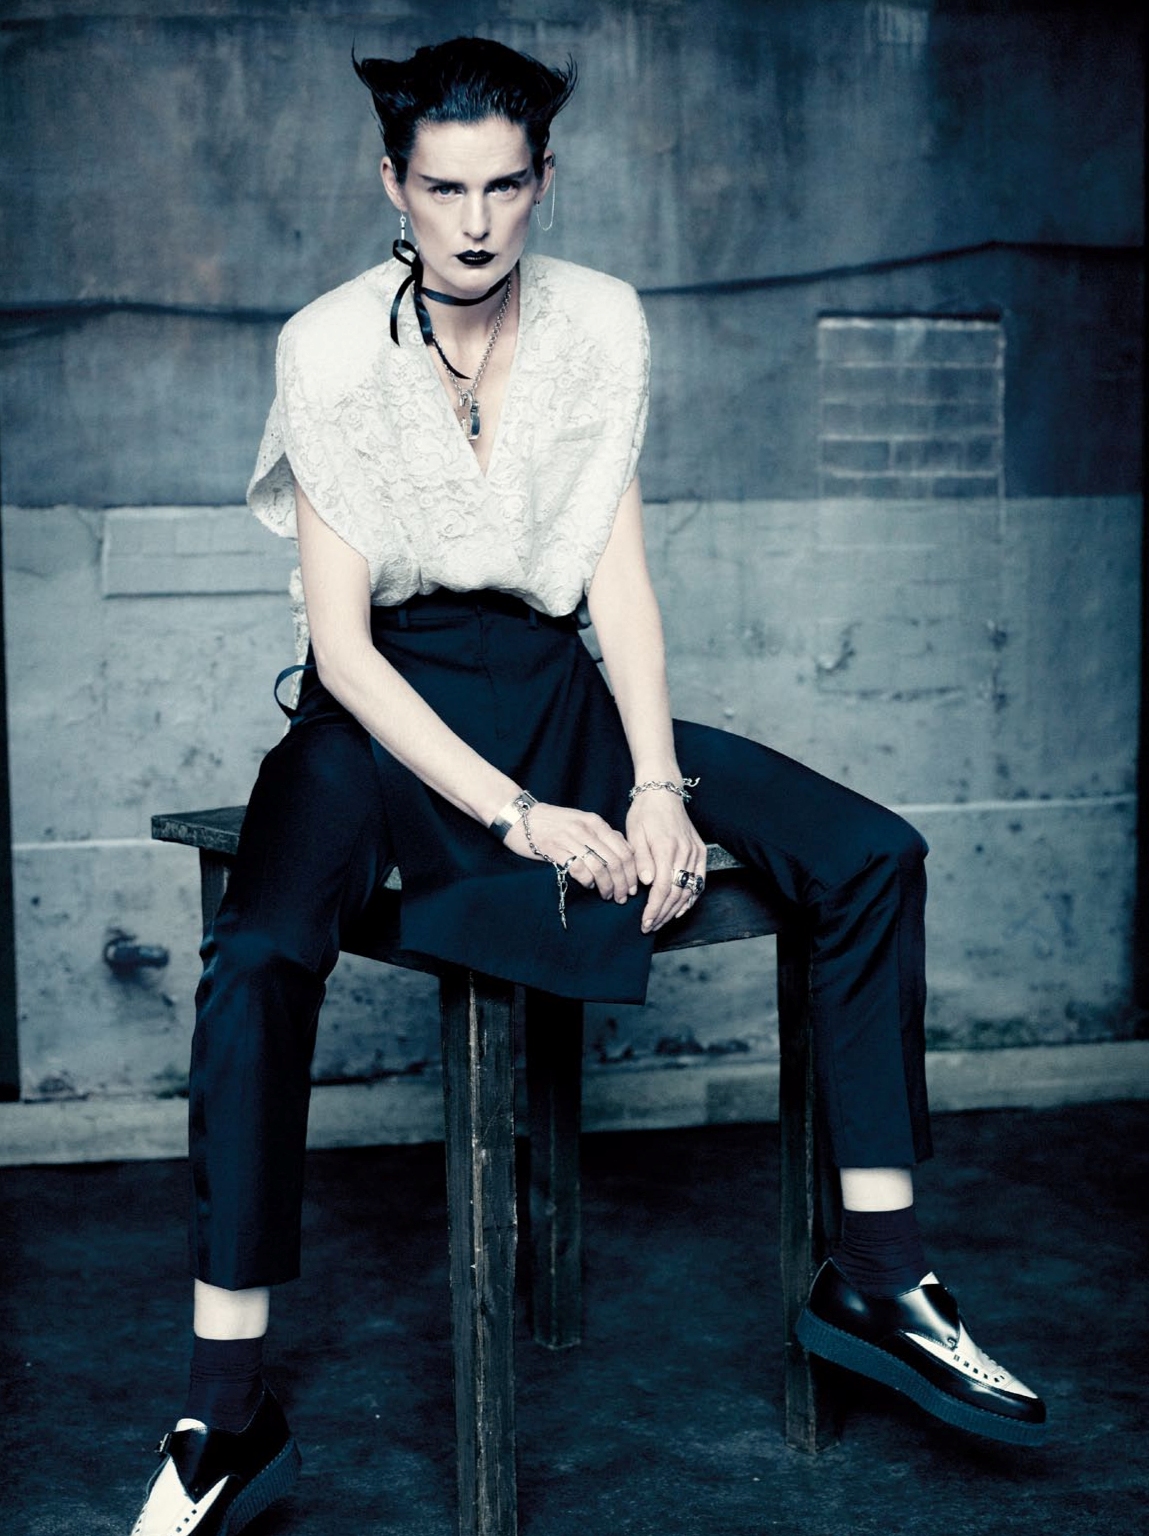 STELLA TENNANT & GUINEVERE VAN SEENUS BY PAOLO ROVERSI FOR VOGUE UK MAY